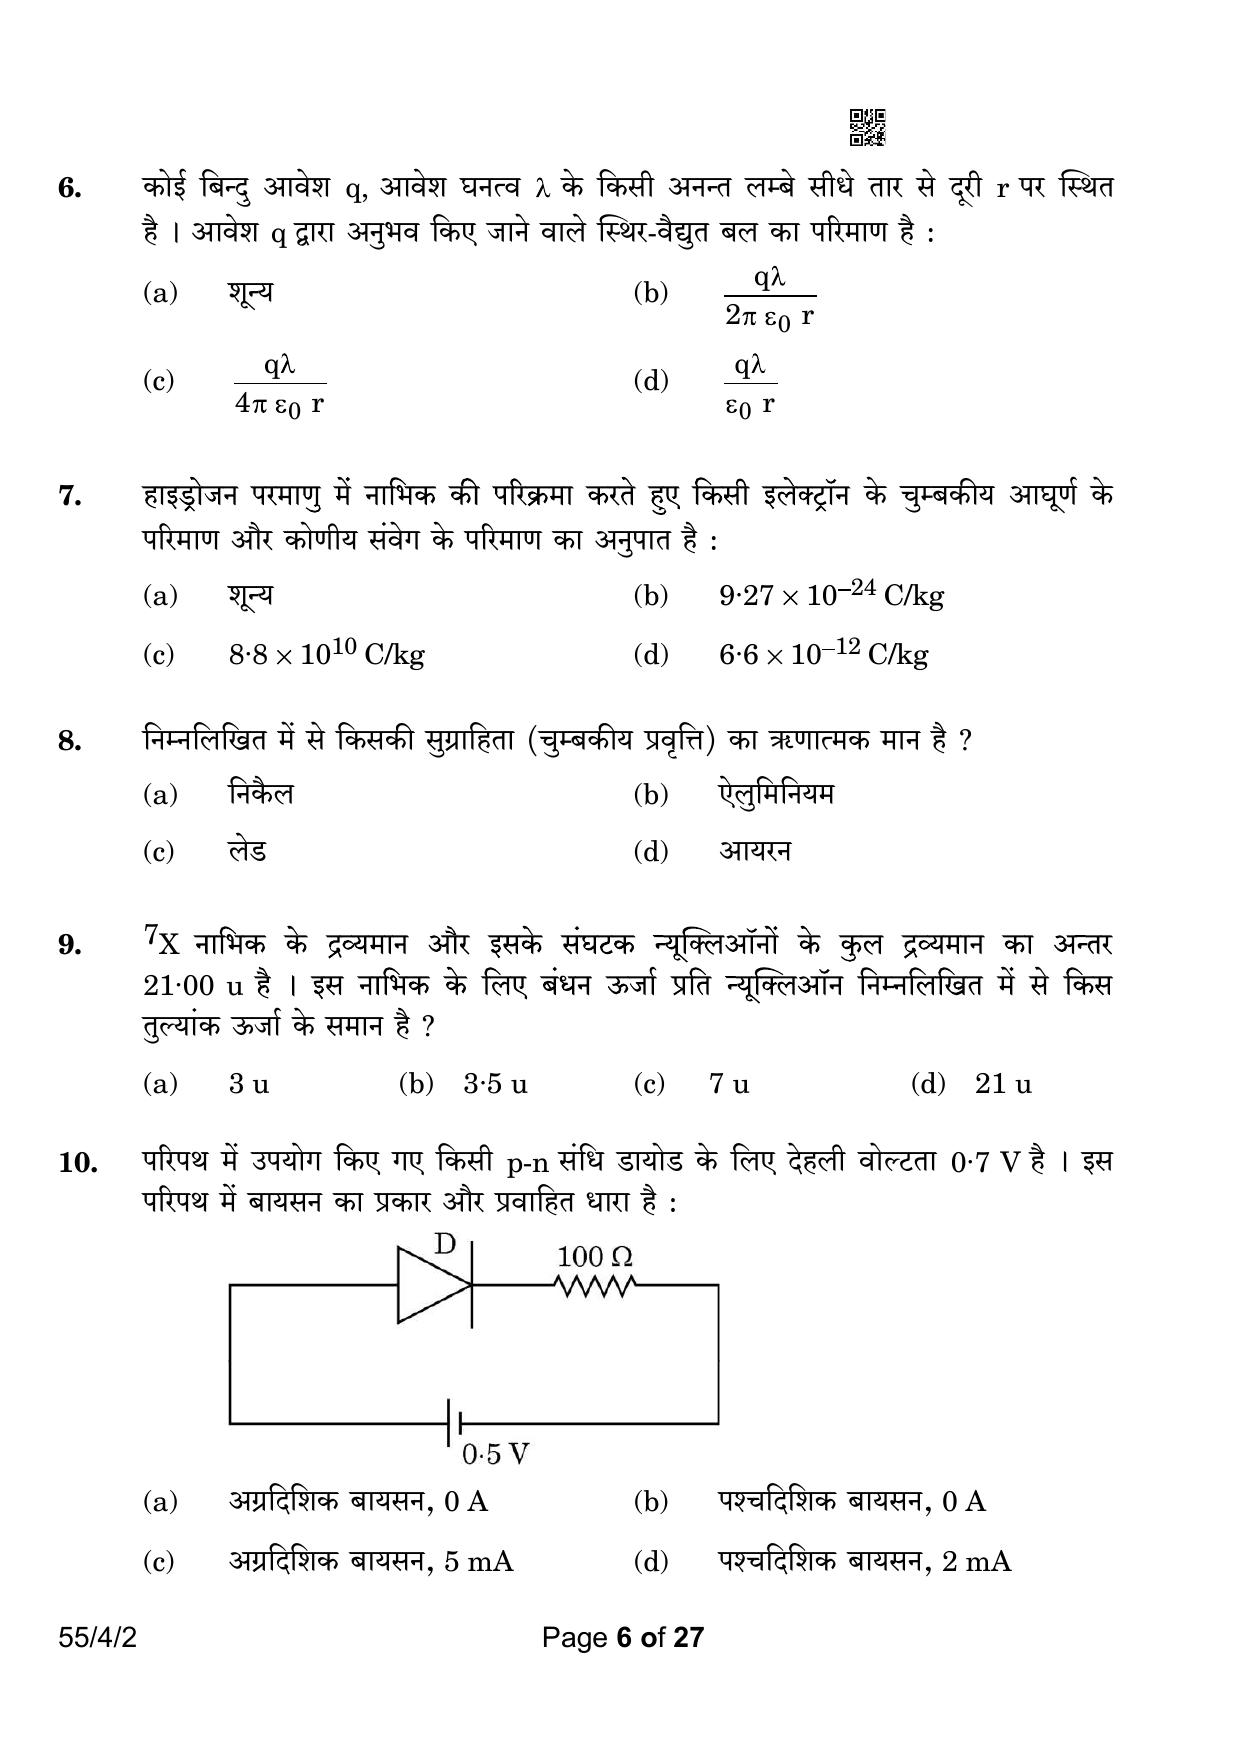 CBSE Class 12 55-4-2 Physics 2023 Question Paper - Page 6